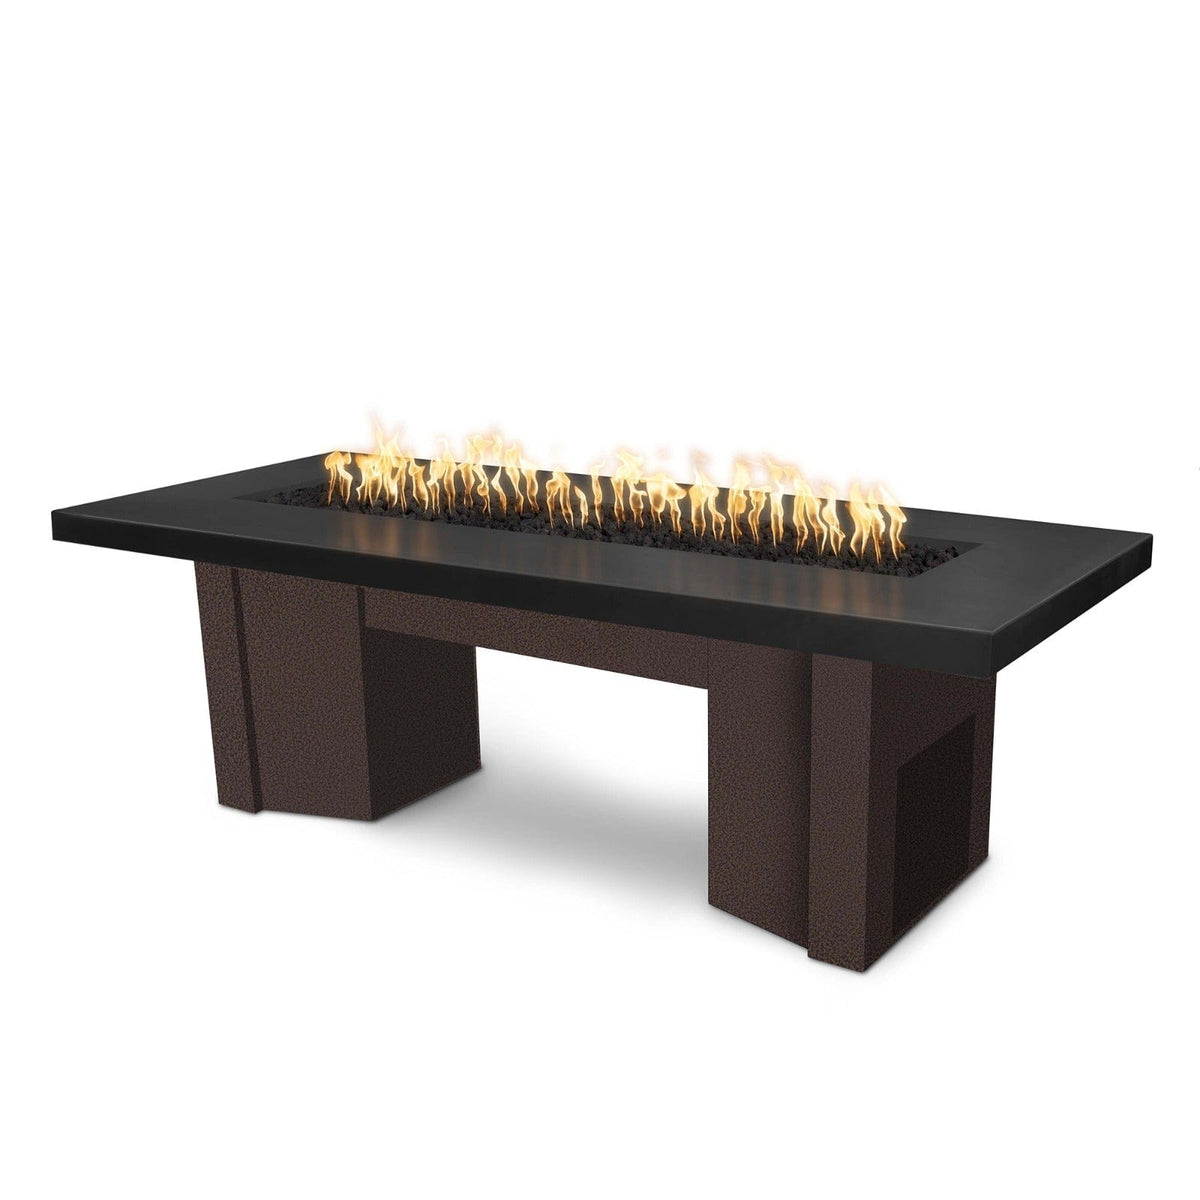 The Outdoor Plus Fire Features Black (-BLK) / Copper Vein Powder Coated Steel (-CPV) The Outdoor Plus 78&quot; Alameda Fire Table Smooth Concrete in Liquid Propane - Match Lit / OPT-ALMGFRC78-LP